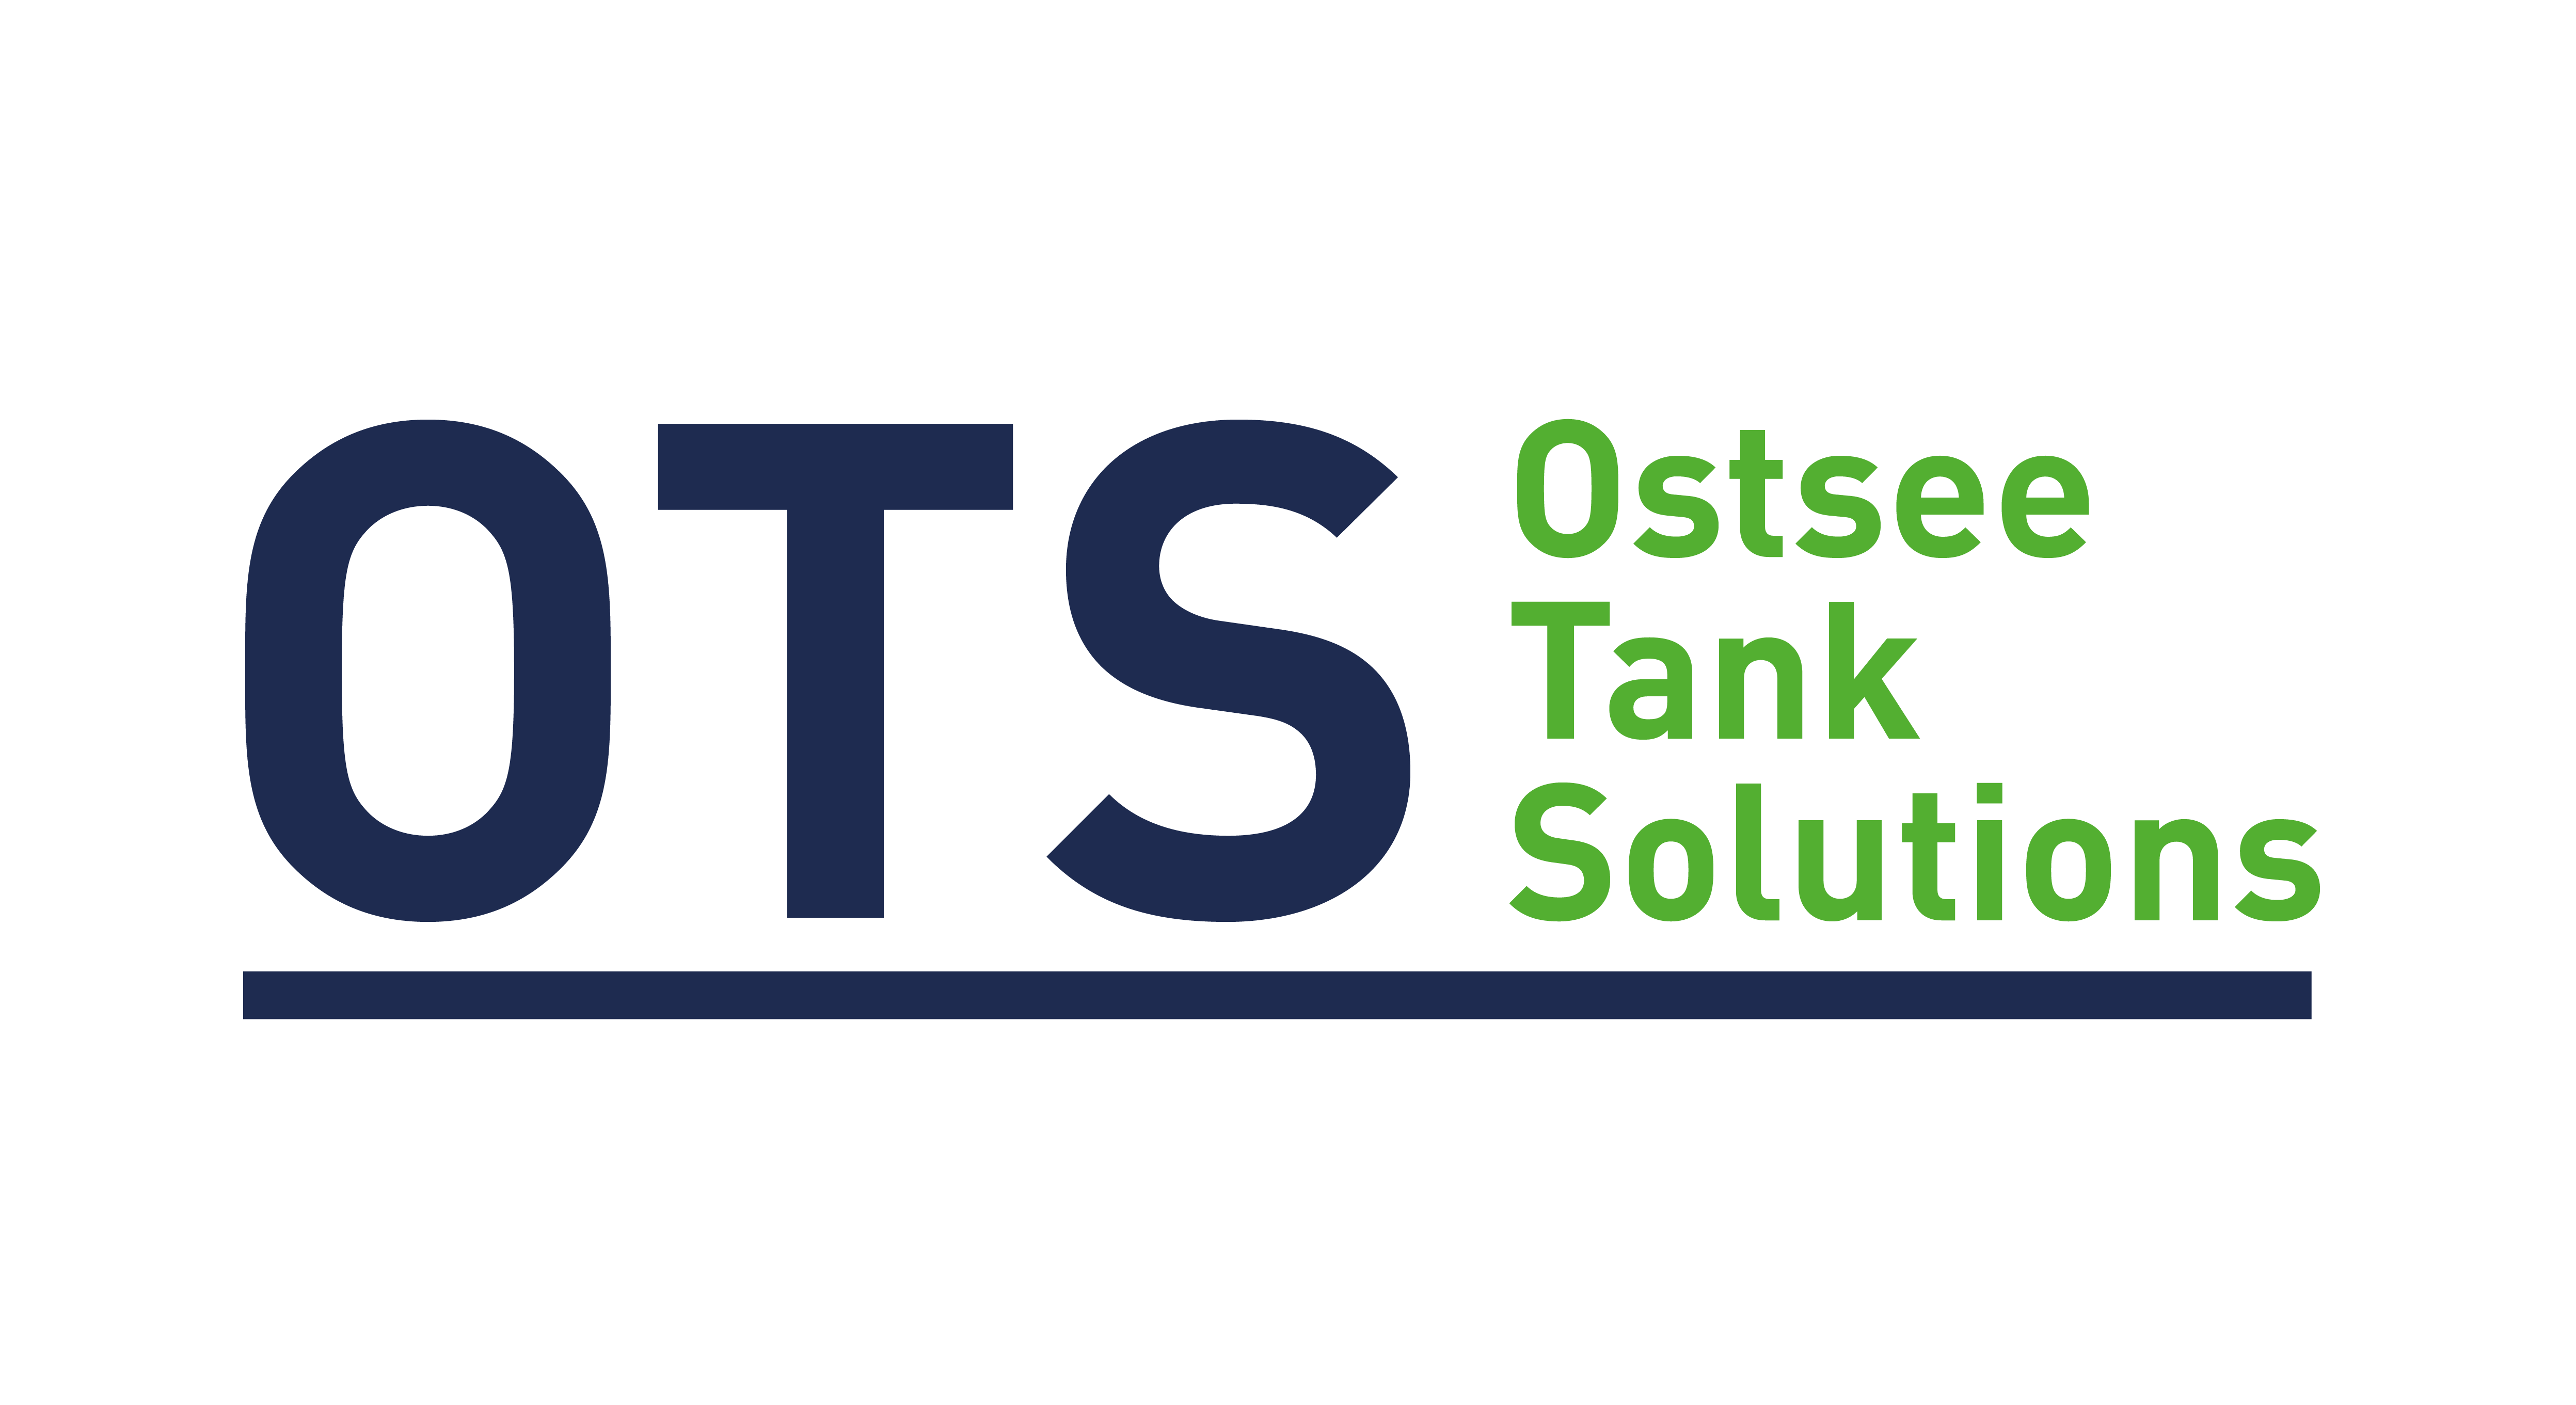 Ostsee Tank Solutions